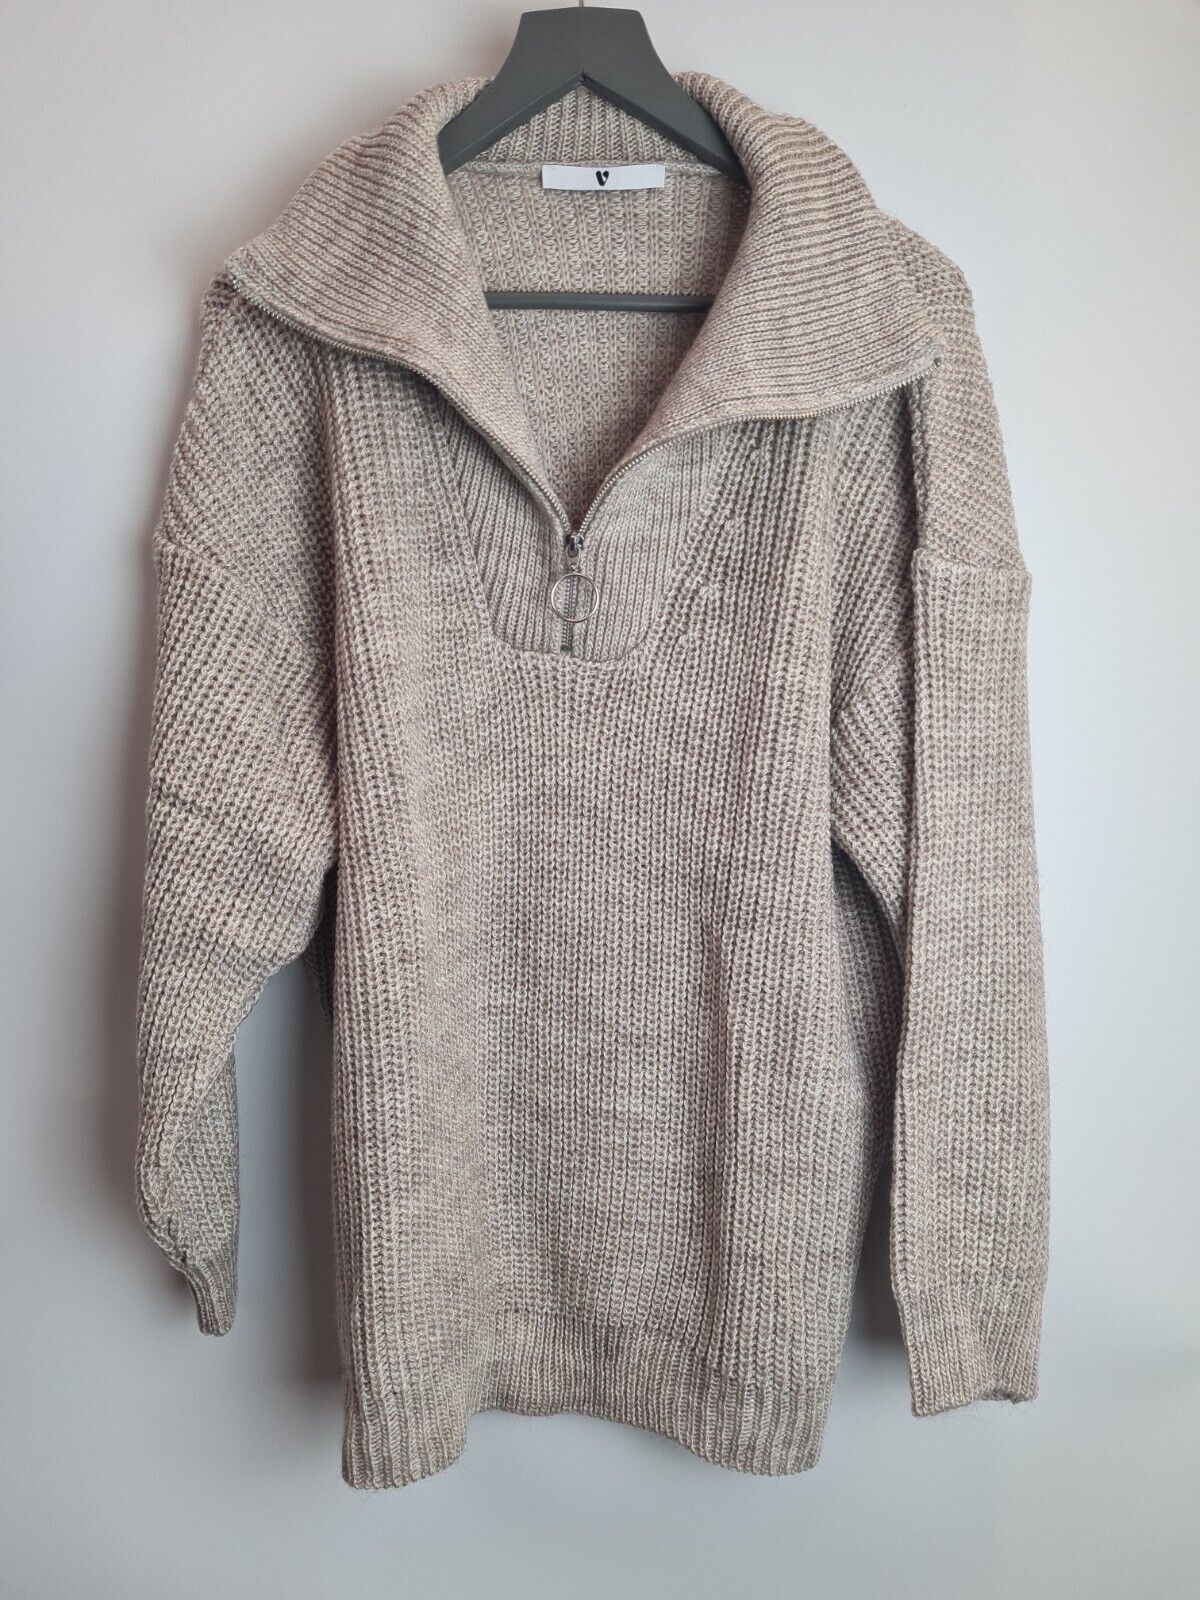 Womens Half Zip Knitted Jumper - Biscuit Size 24  **** V466